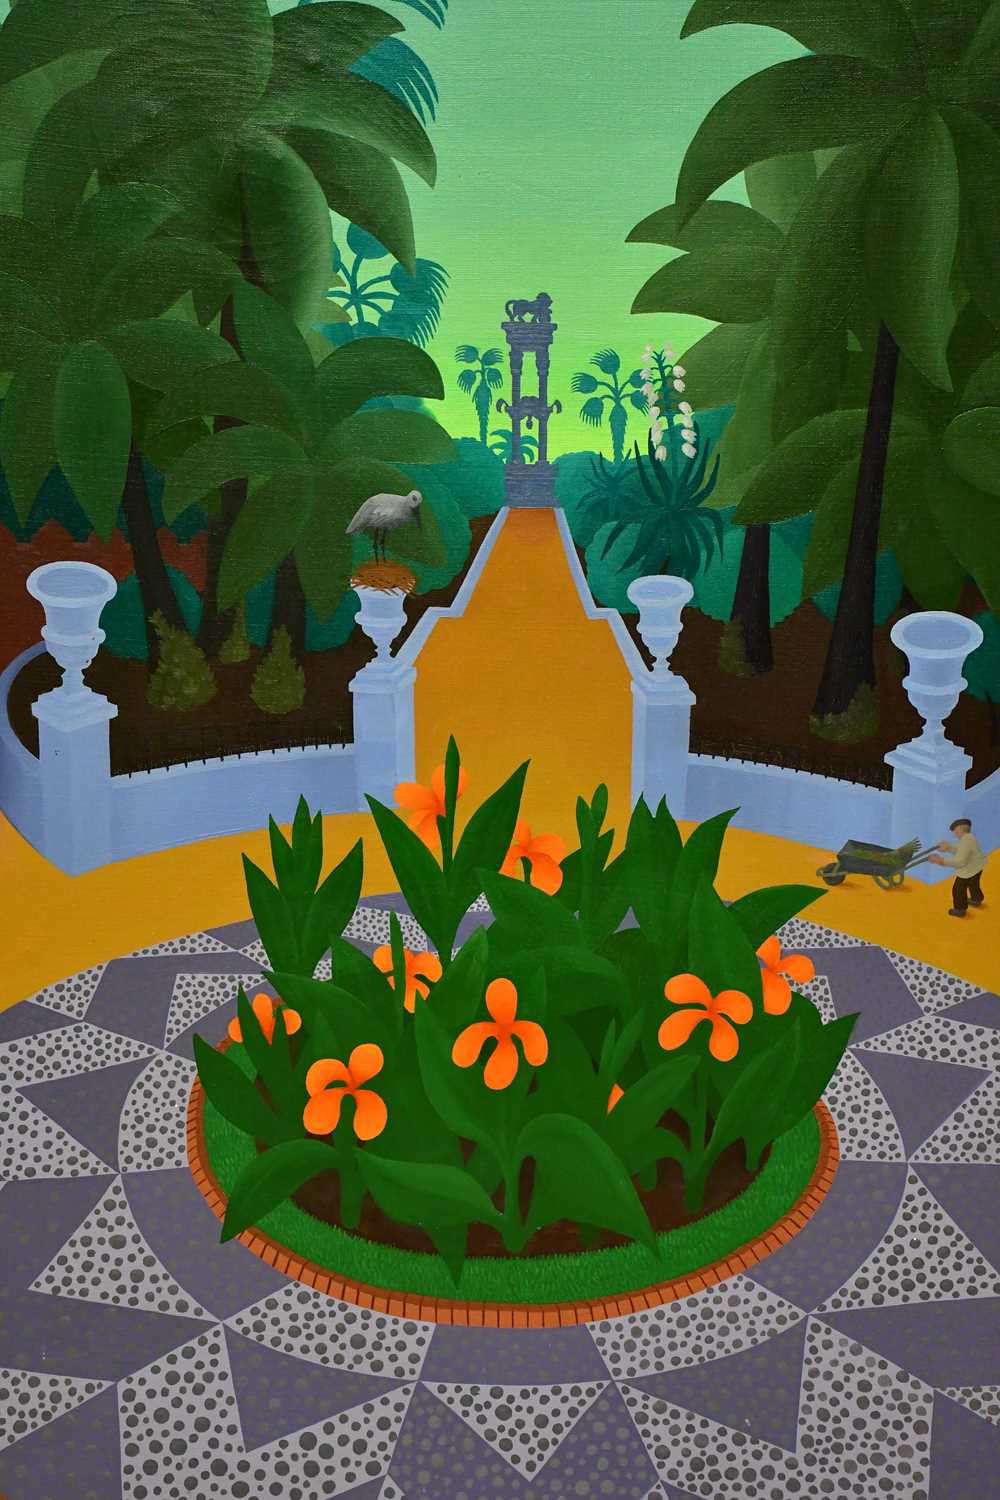 † ANNE GRAHAM; oil on canvas, 'Garden Study', signed and dated 73-74, 90 x 60cm, framed. - Image 2 of 4